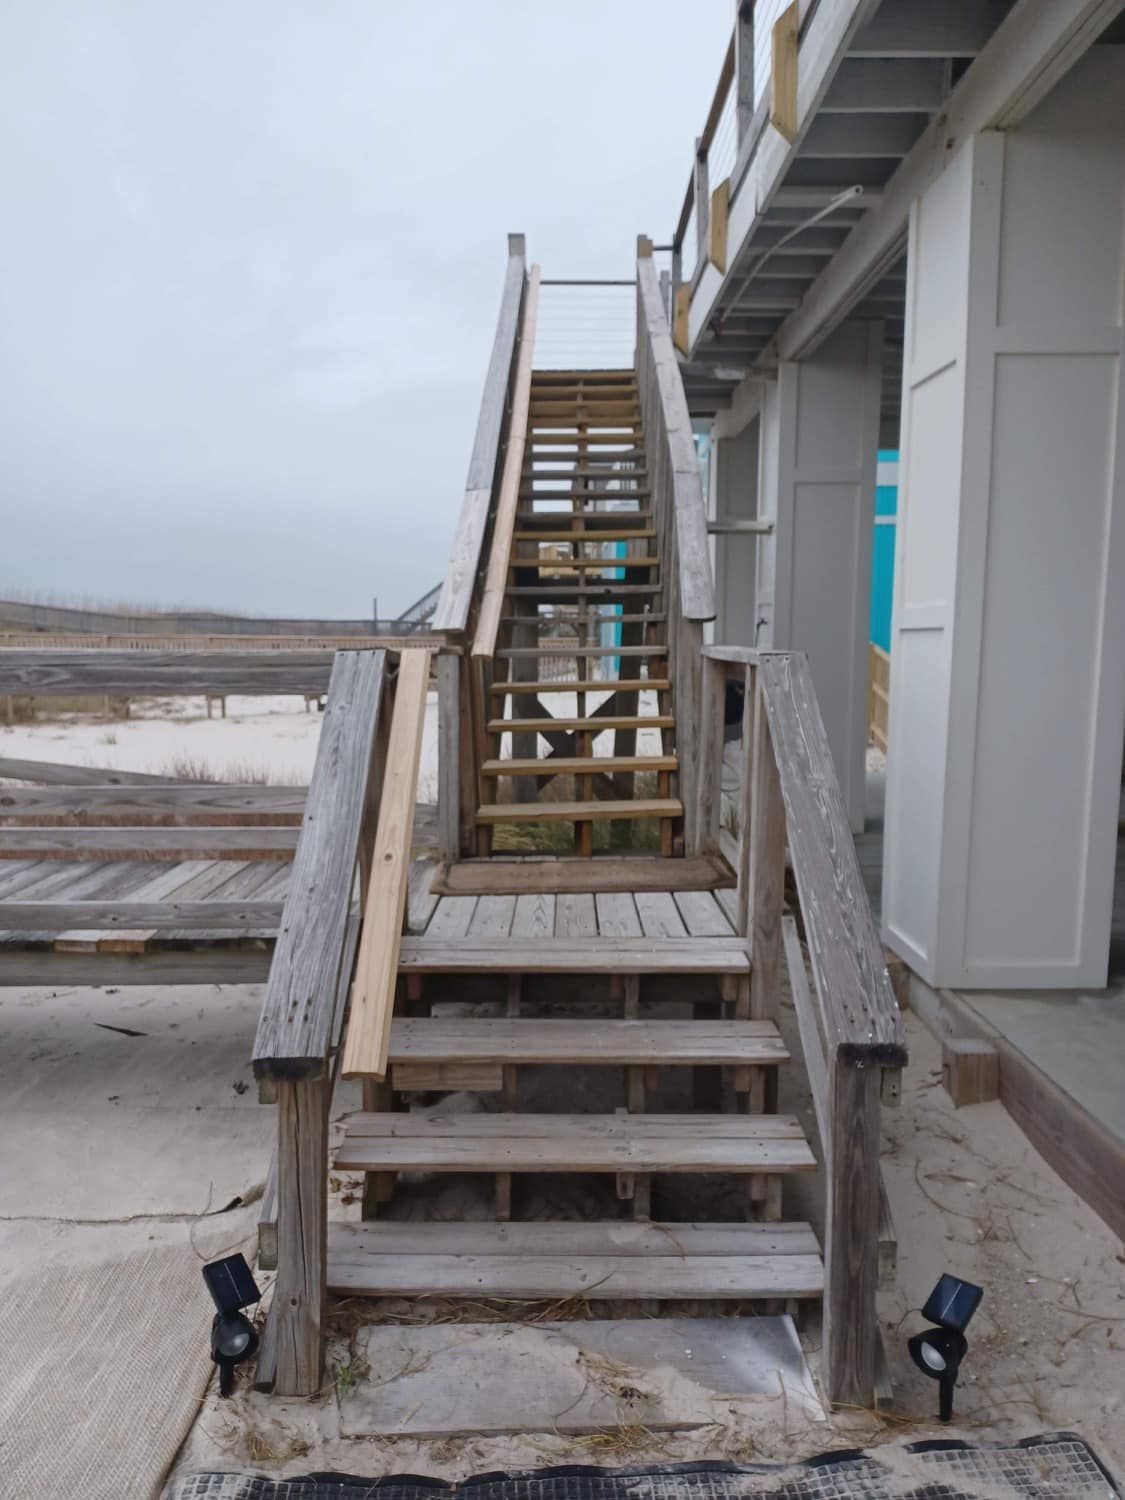 Before Fixing The Stairs On The Beach - Fort Walton Beach, FL - Swear Fence & Lawn Installations LLC